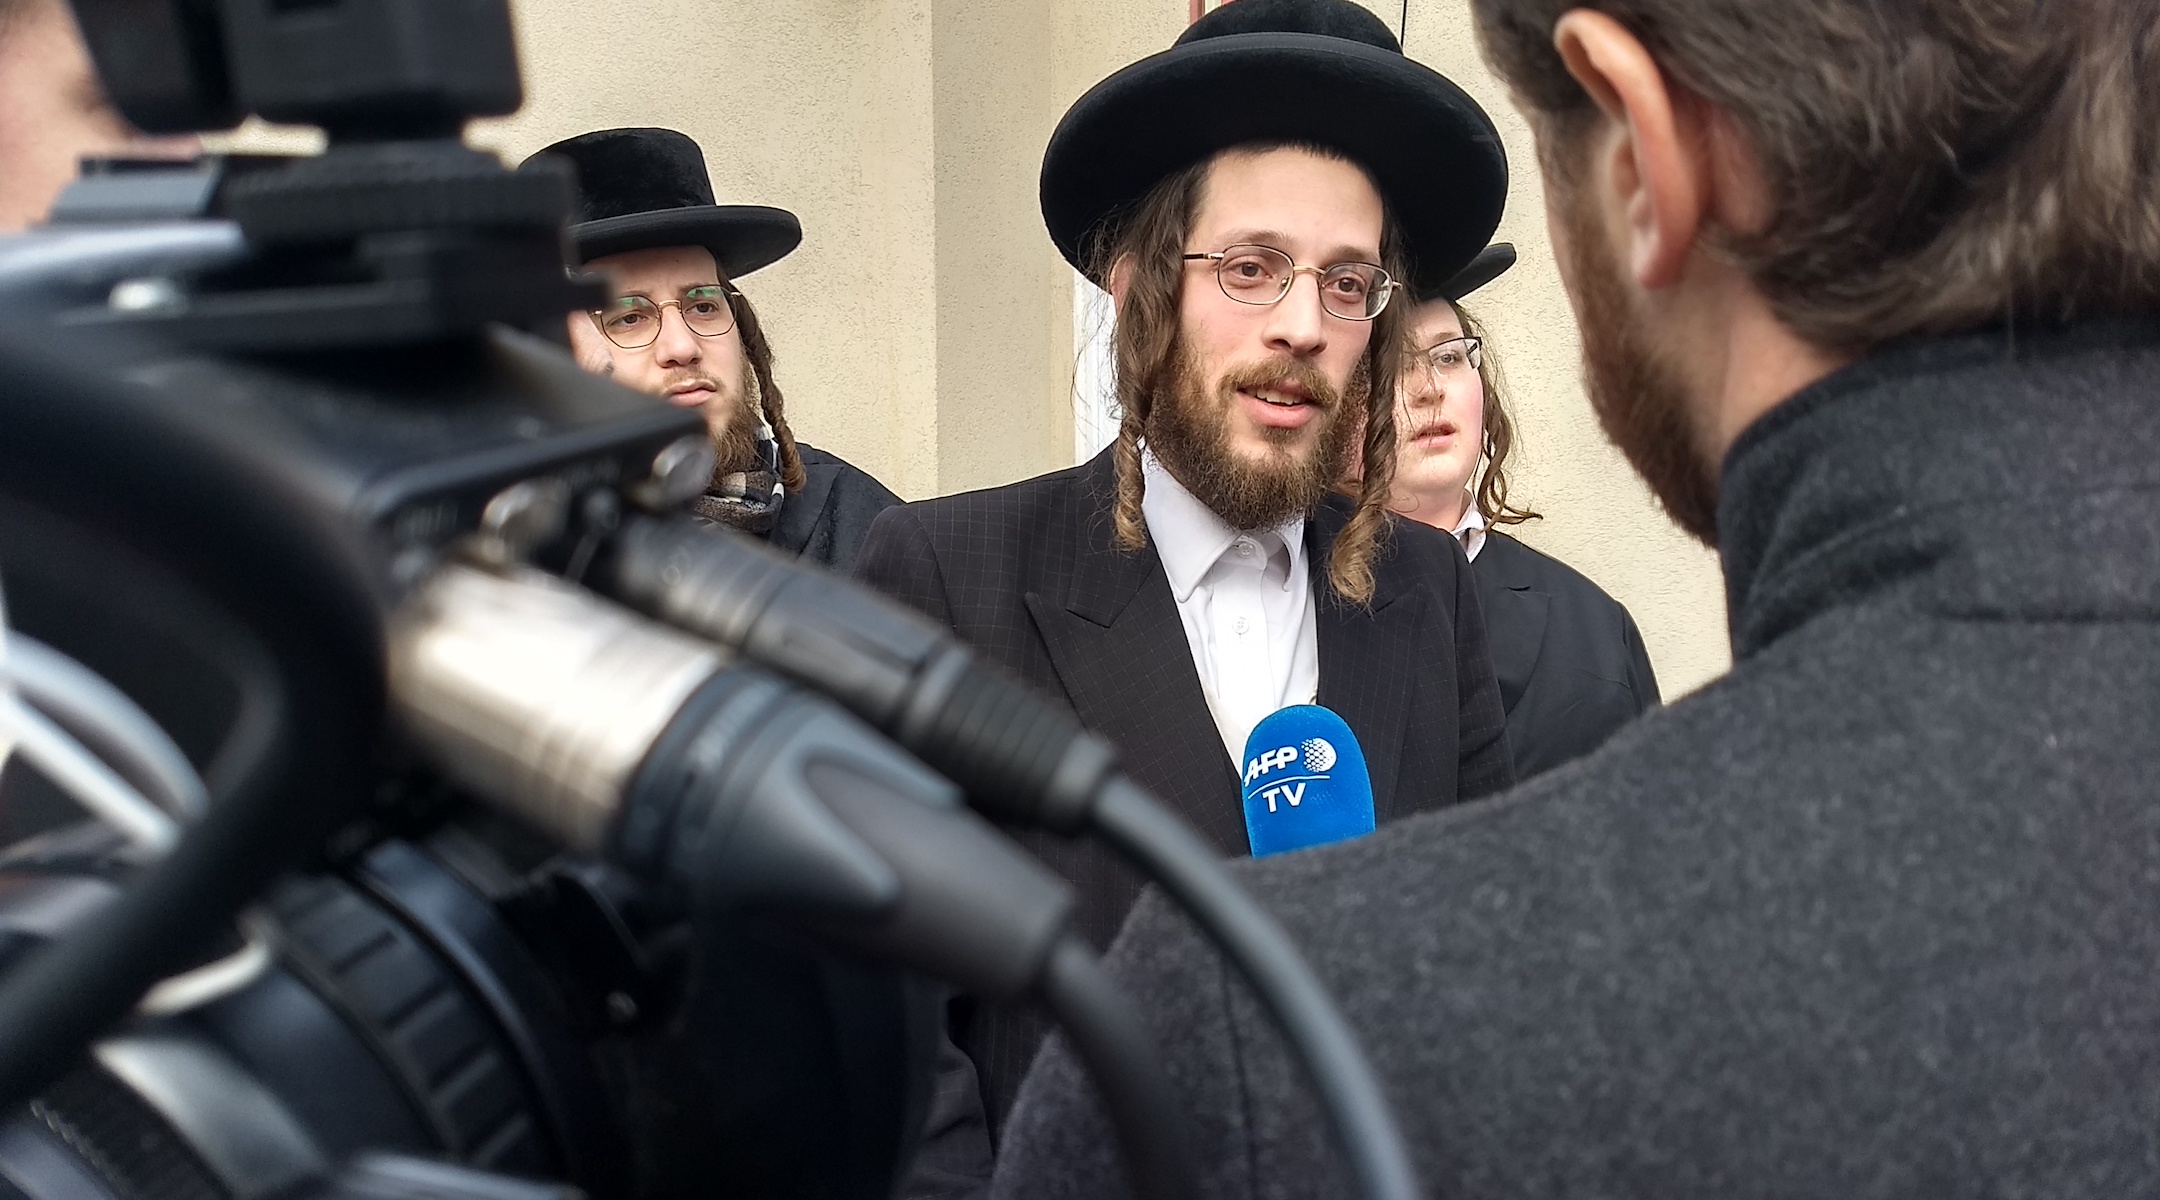 Joseph Gluck, who threw a coffee table at the attacker's head Saturday night, speaks to reporters the next day outside the rabbi's house. (Ben Sales)